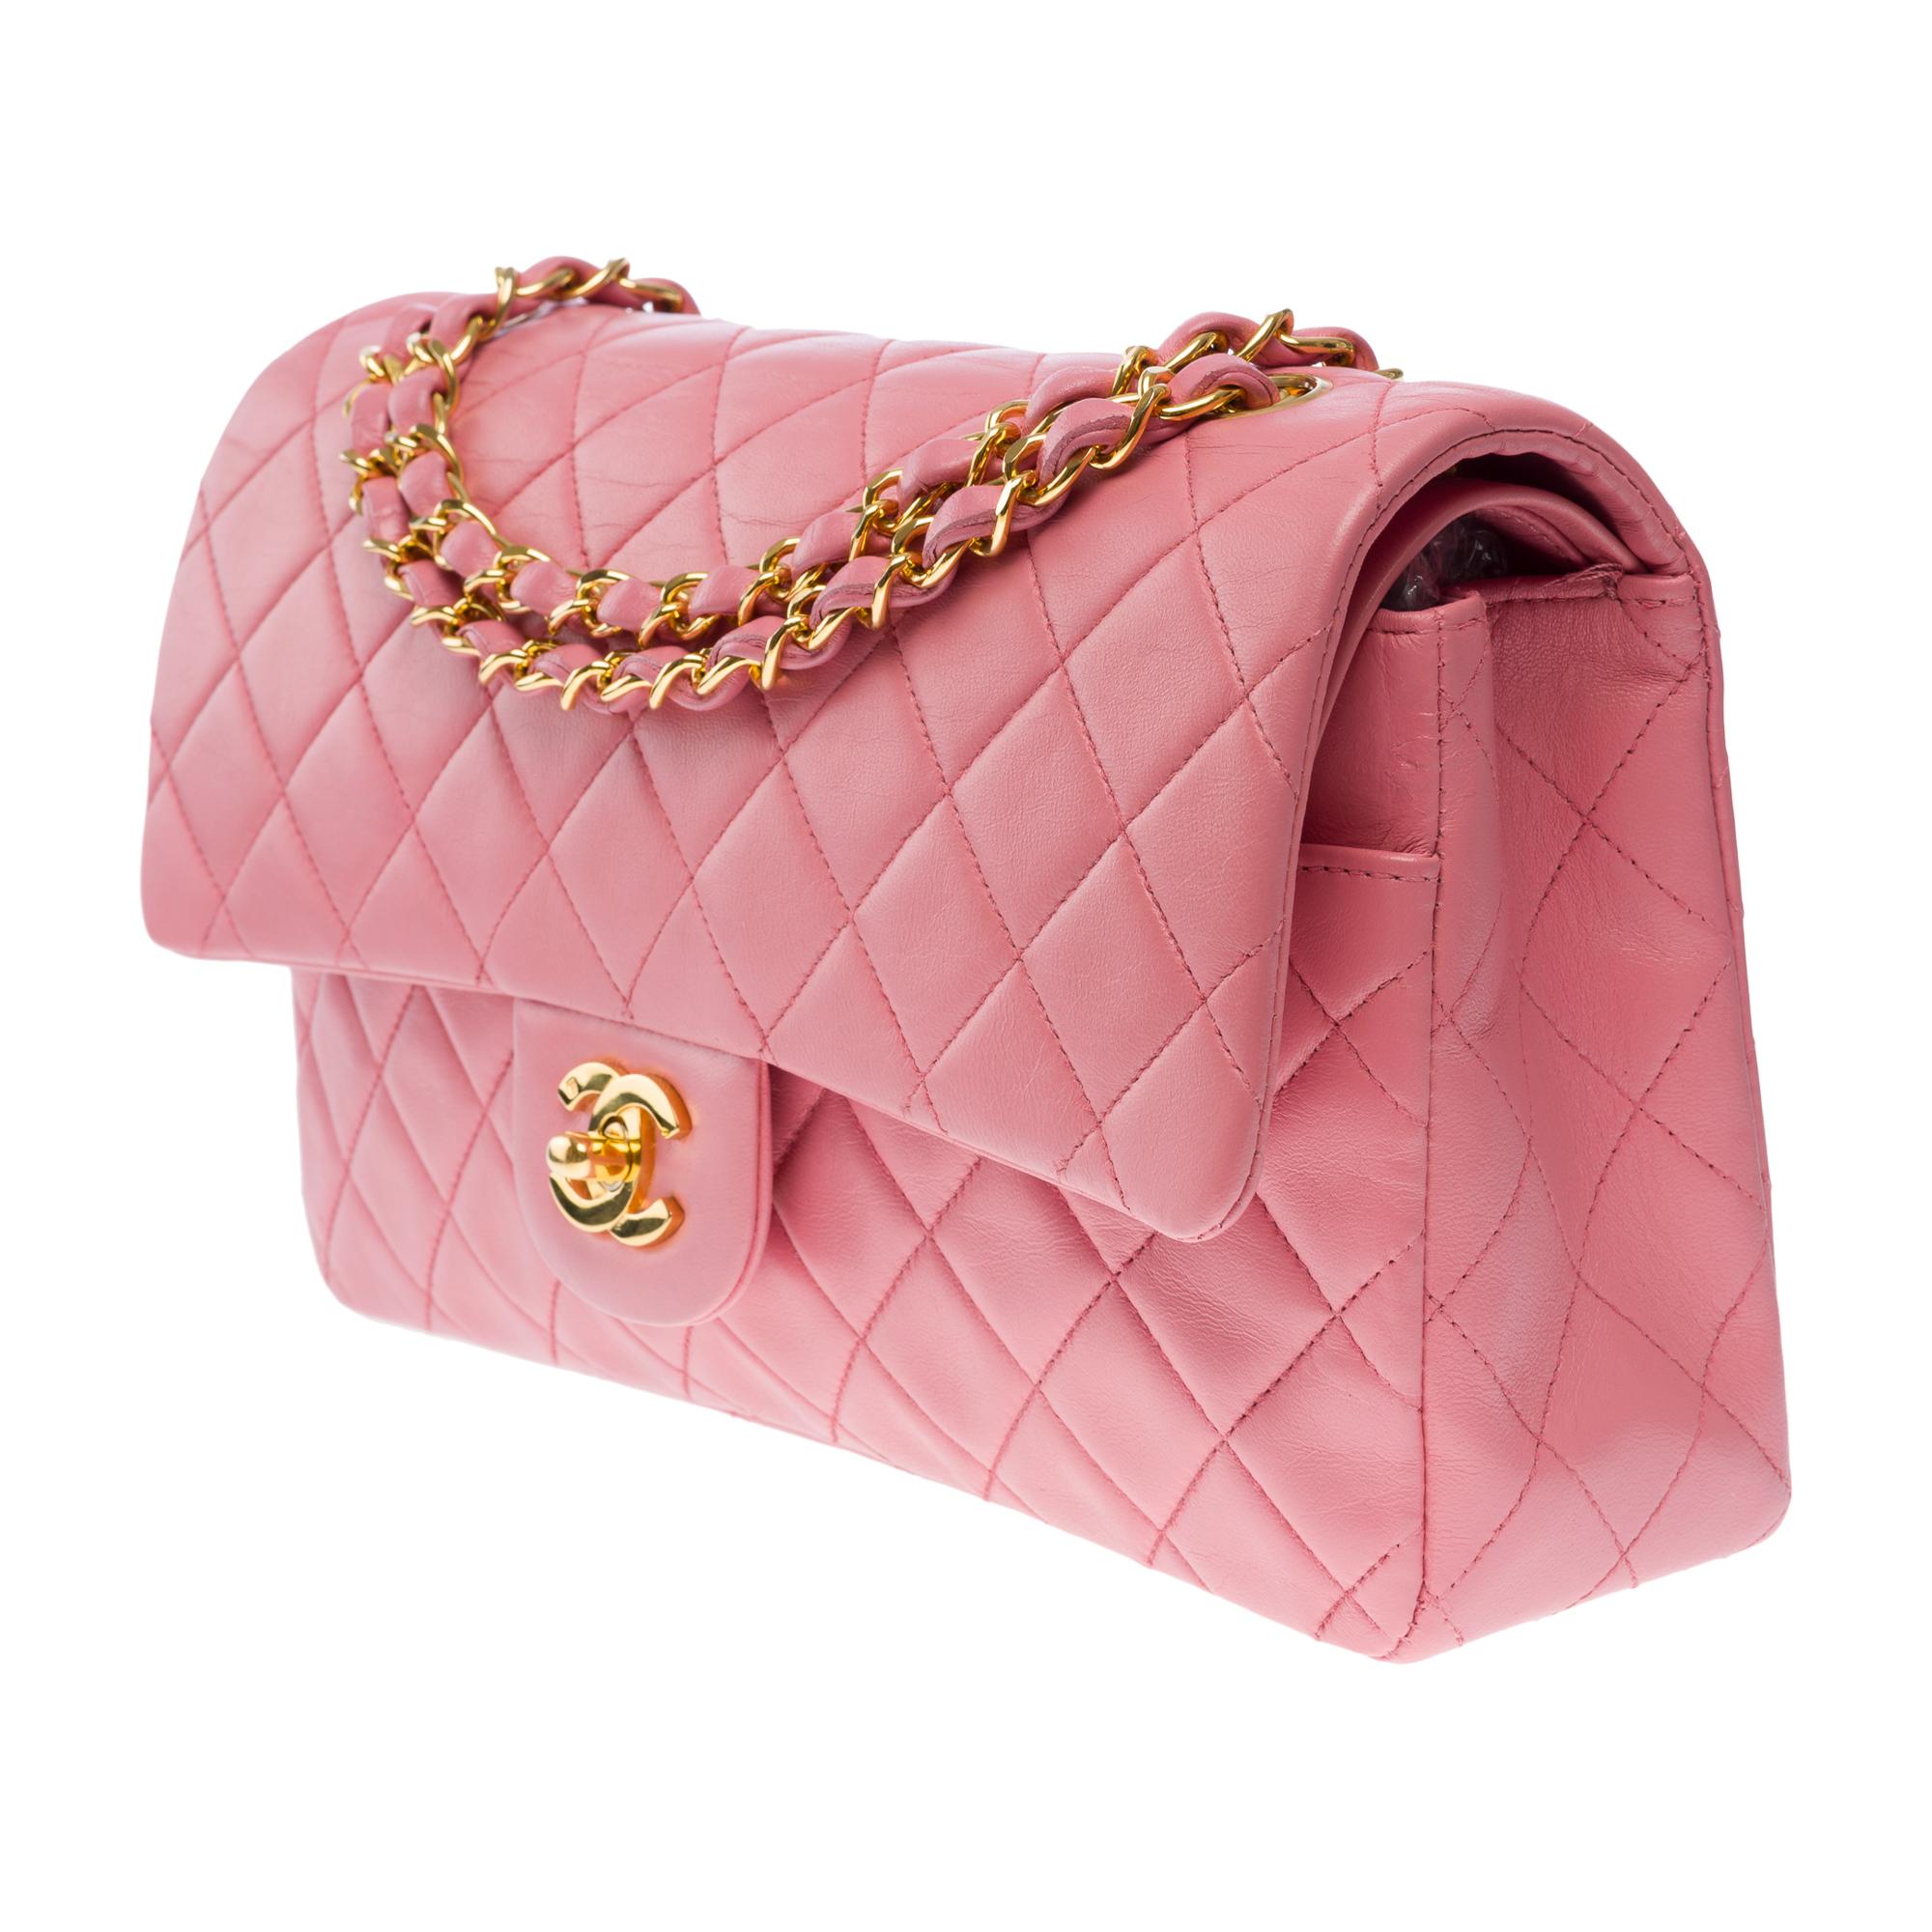 Chanel Timeless Medium double Flap shoulder bag in Pink quilted lambskin, GHW 2